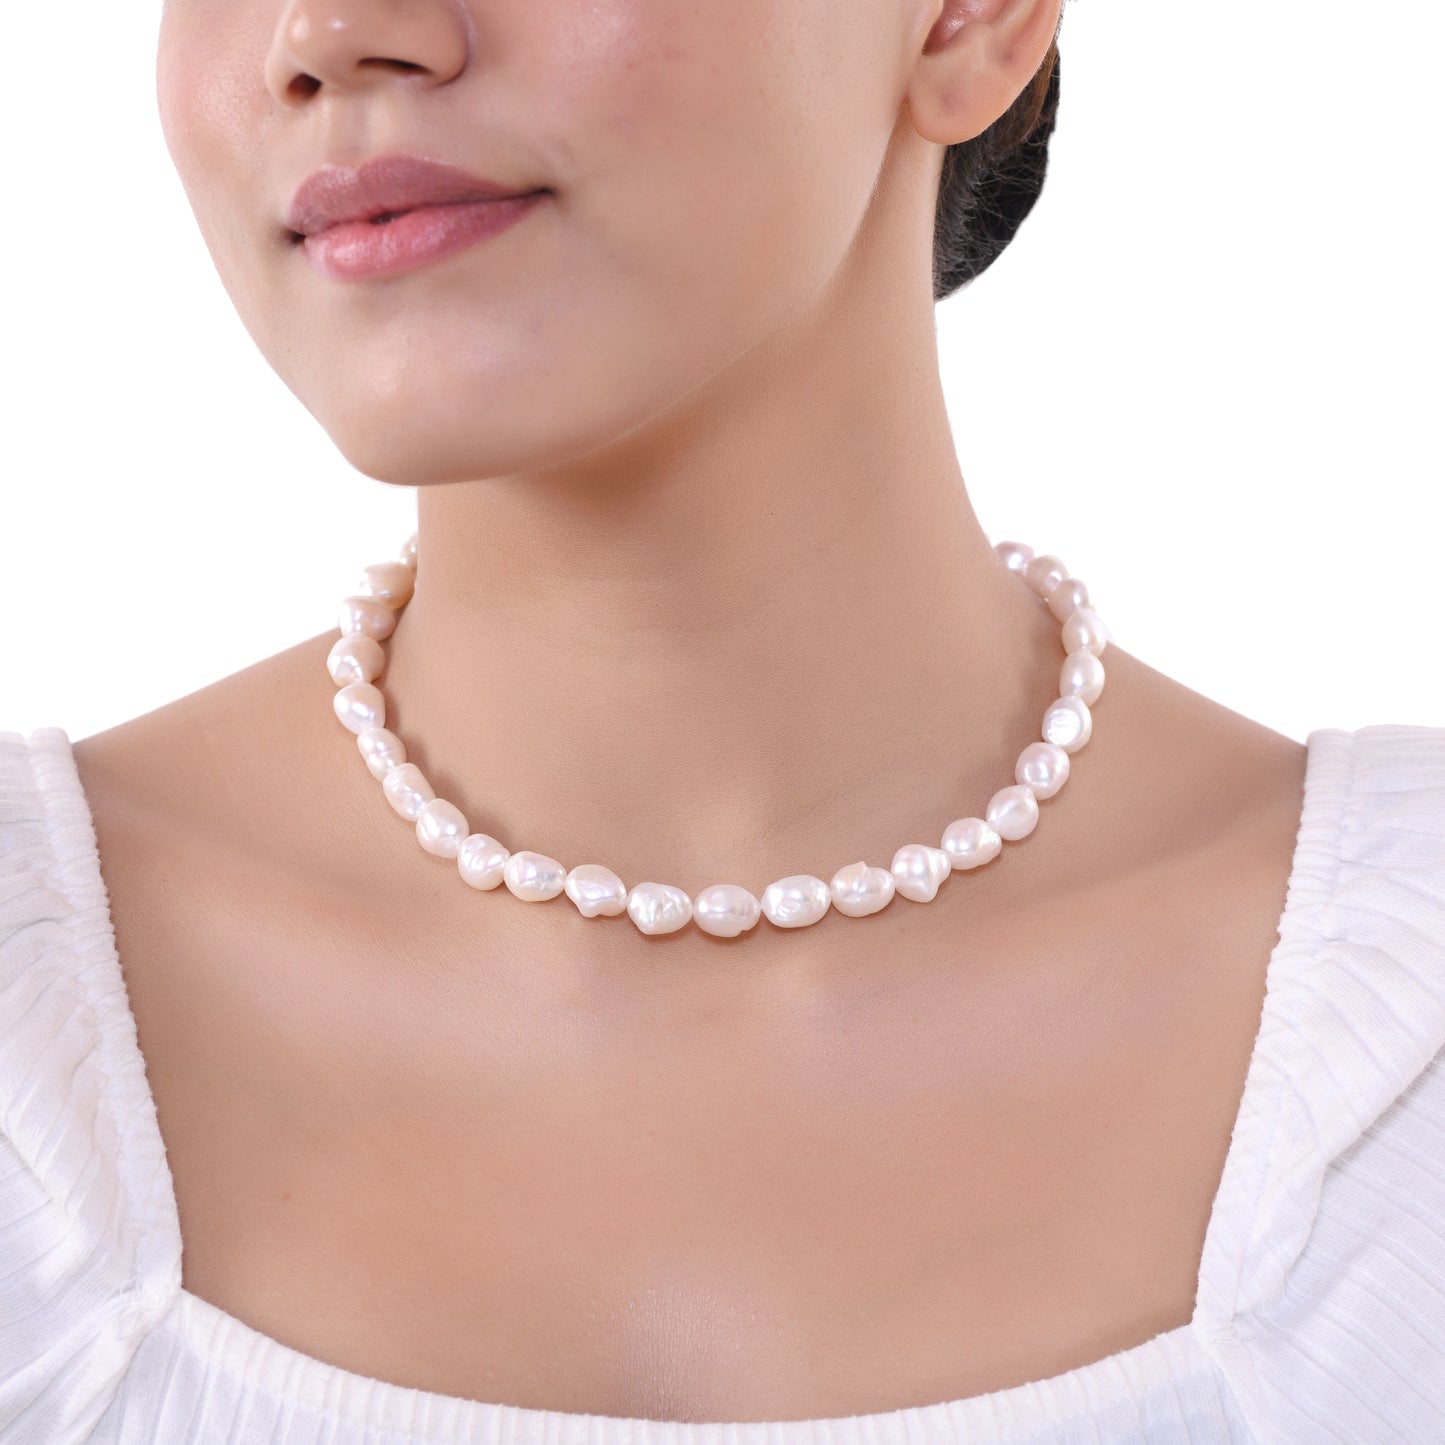 Which Pearl Jewelry is Most Wearable in Engagements?